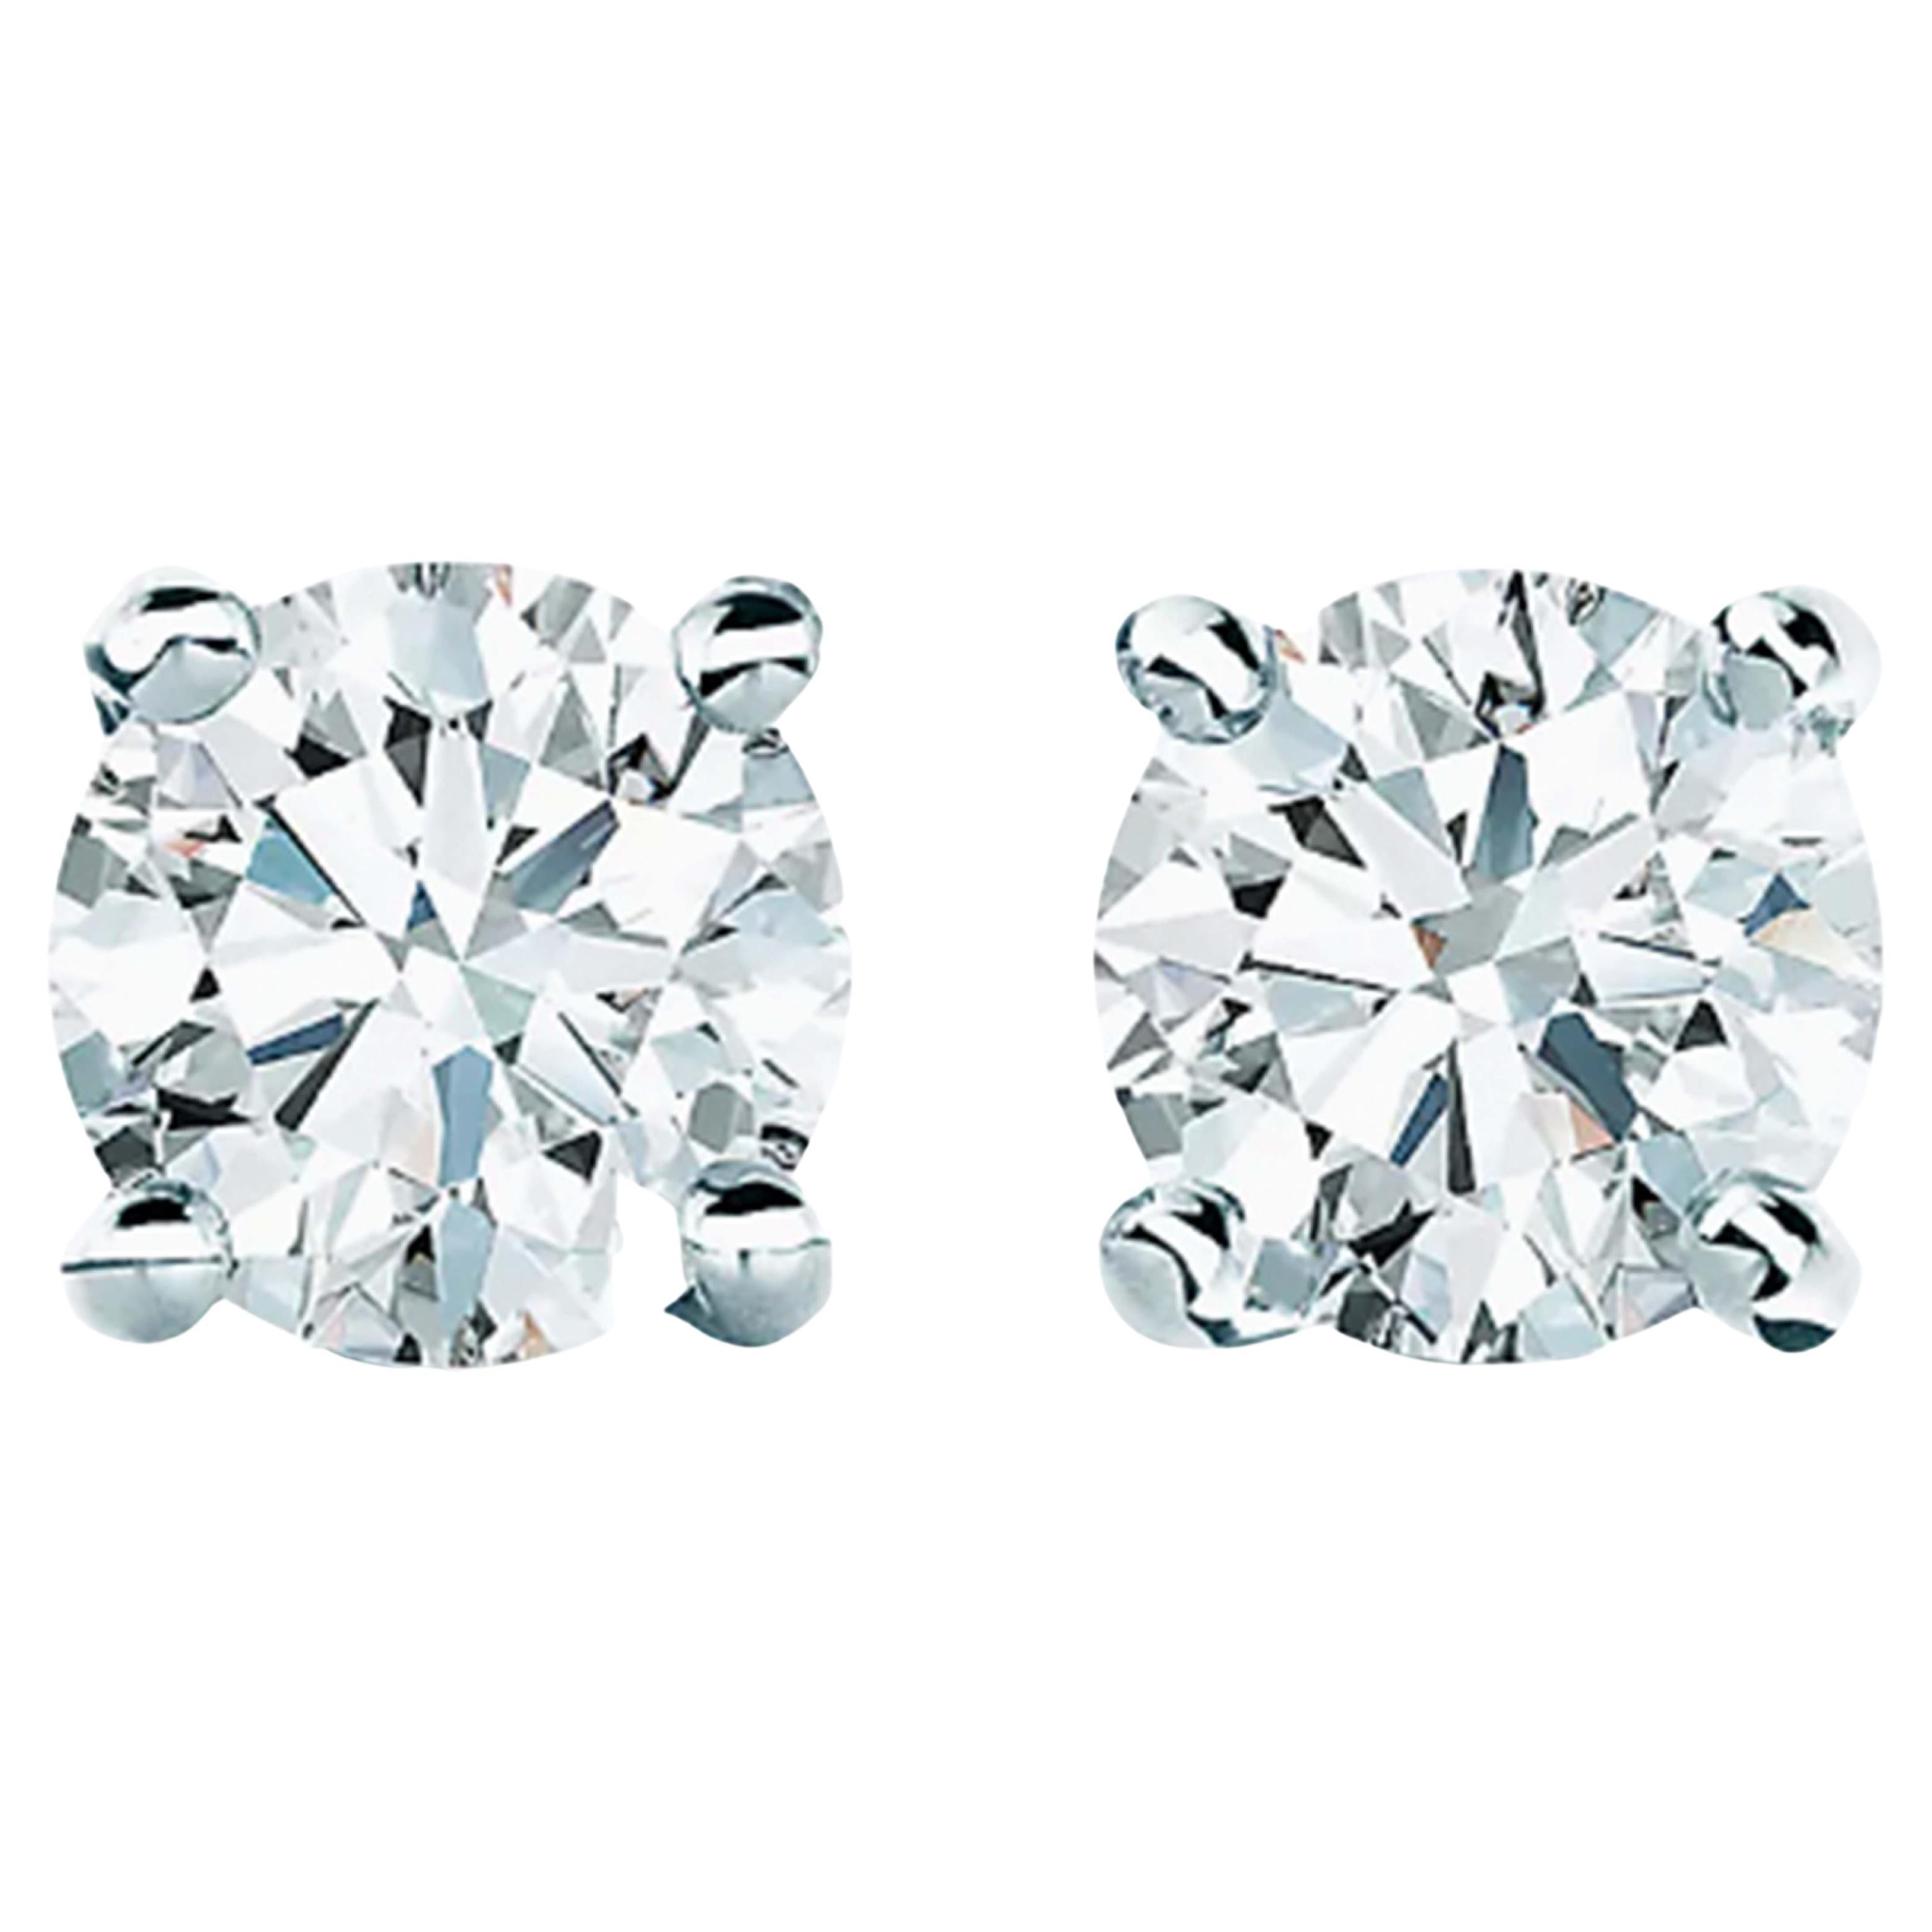 Tiffany & Co. Solitaire Diamond Stud Earrings in Platinum 0.31 Ct